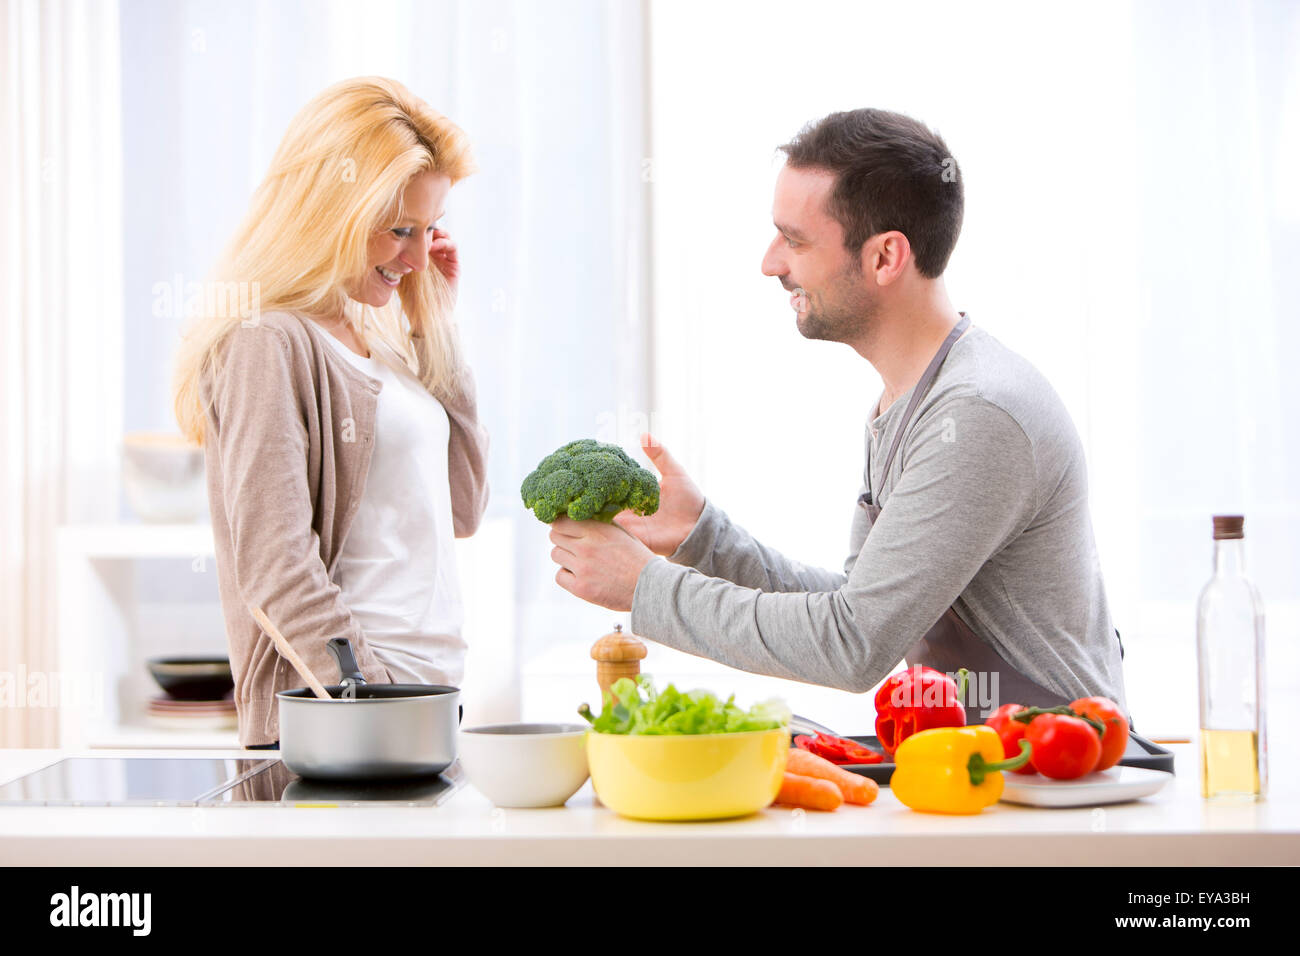 View of a Young attractive couple having fun in the kitchen Stock Photo